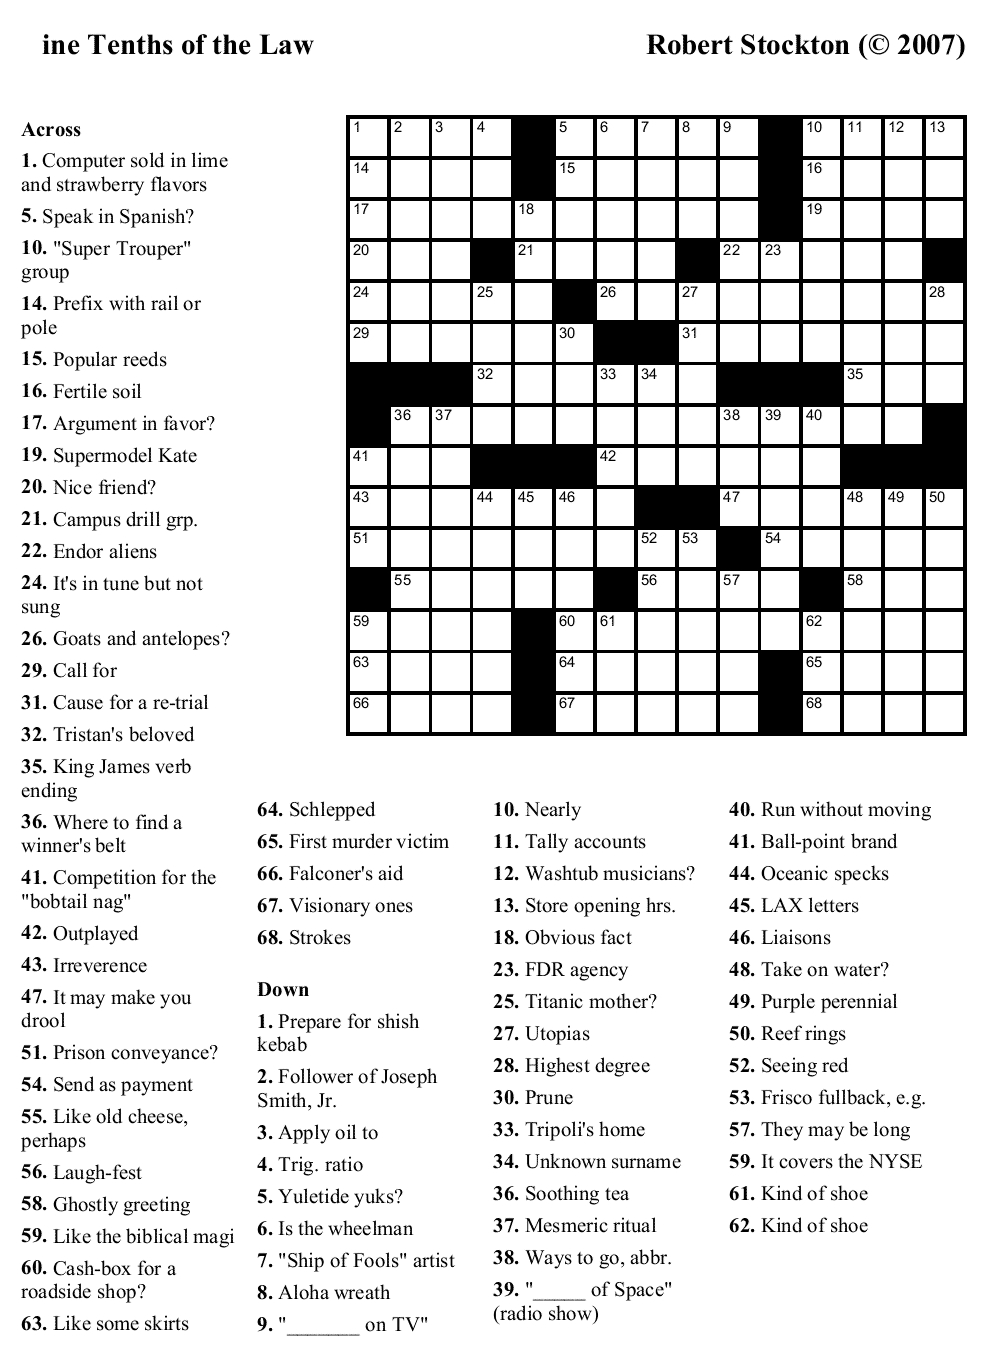 Crossword Puzzles Printable - Yahoo Image Search Results | Crossword - Free Printable Crosswords Usa Today